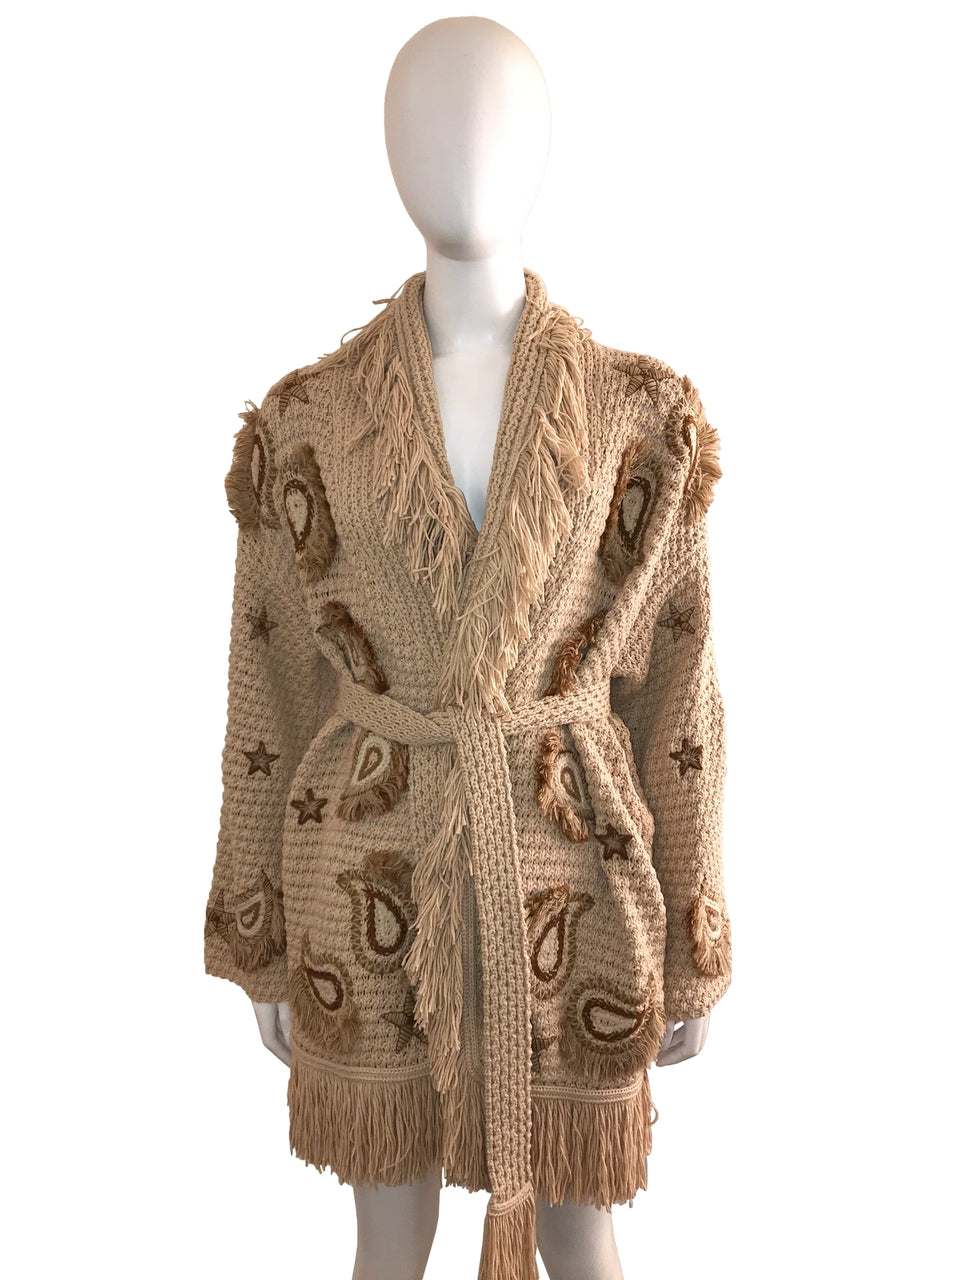 Fringed Knit Cardigan with Stars and Paisley Embroidery